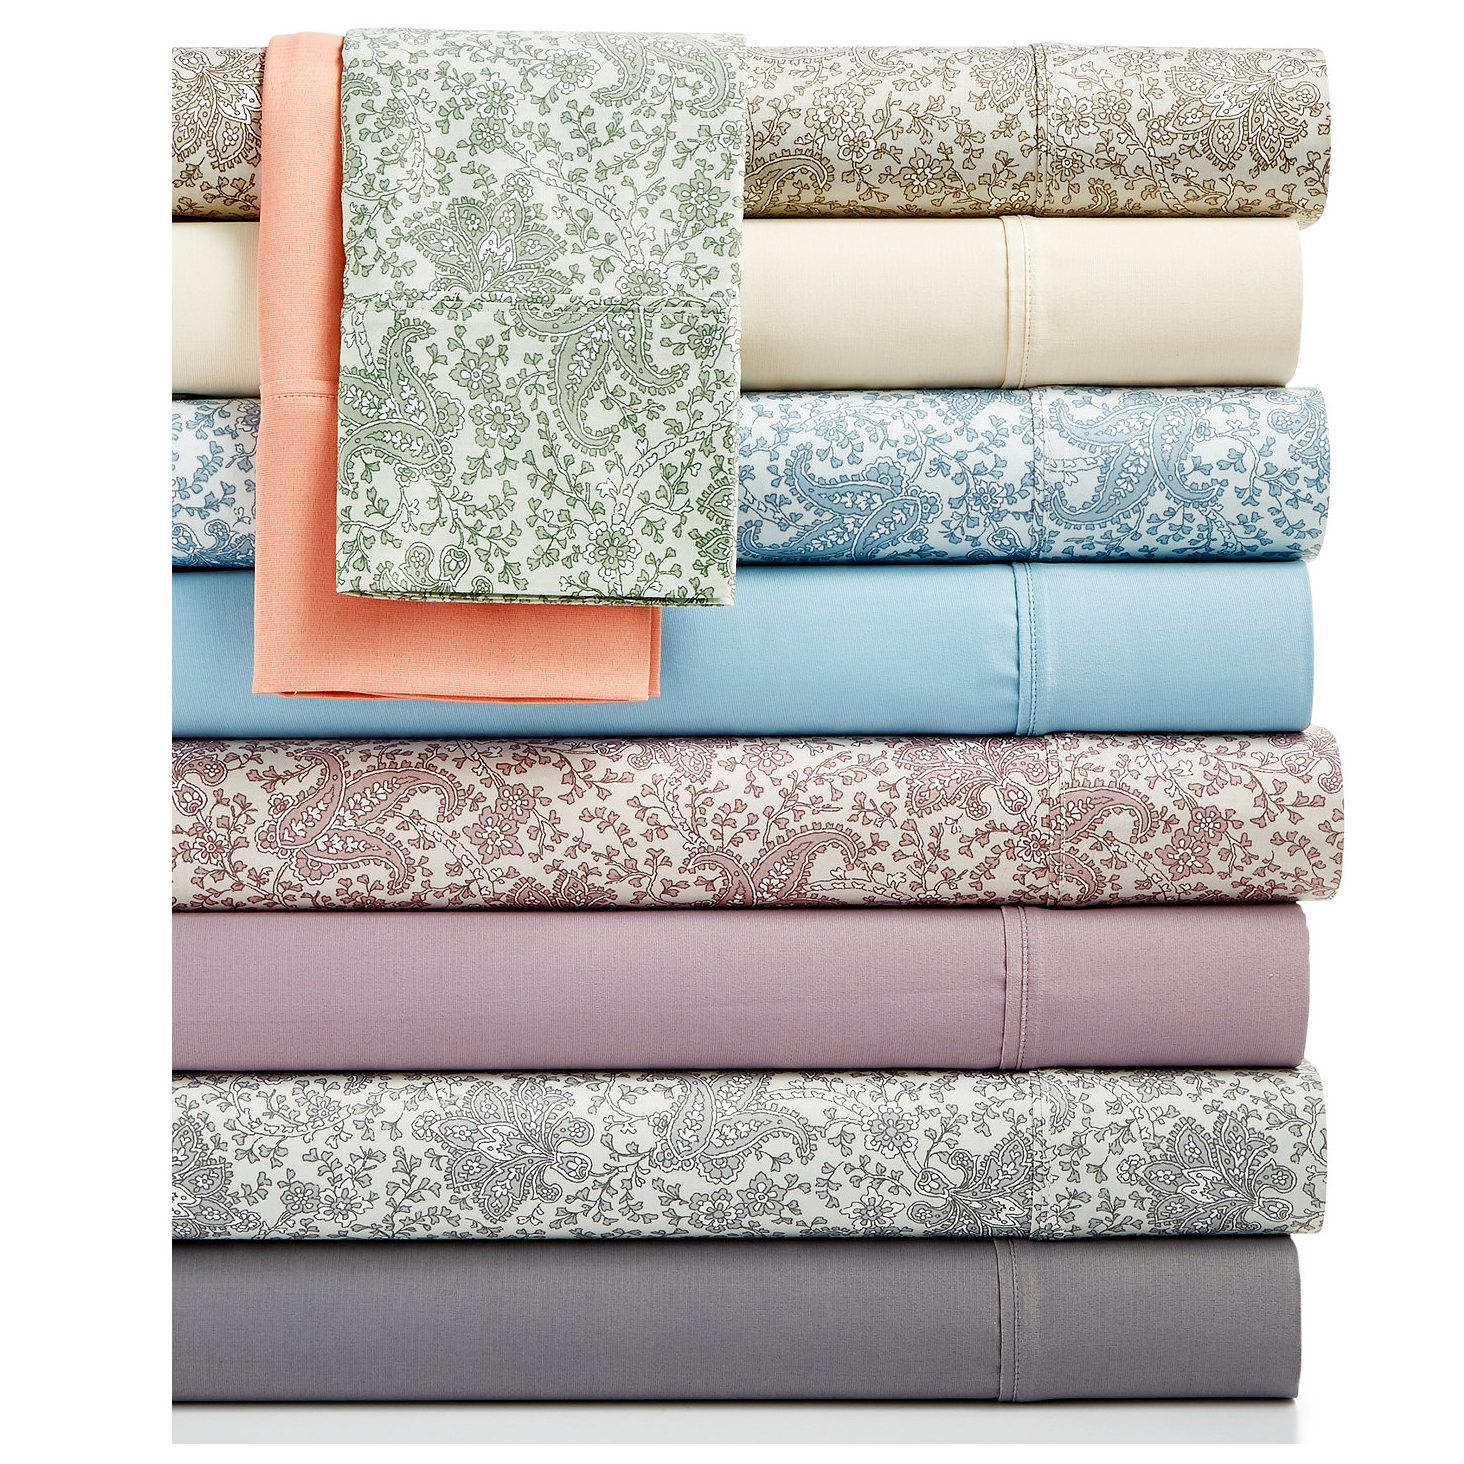 Macy’s: Caprice Solid and Floral Print 350 Thread Count 4-Pc. Sheet Sets Only $24.99!